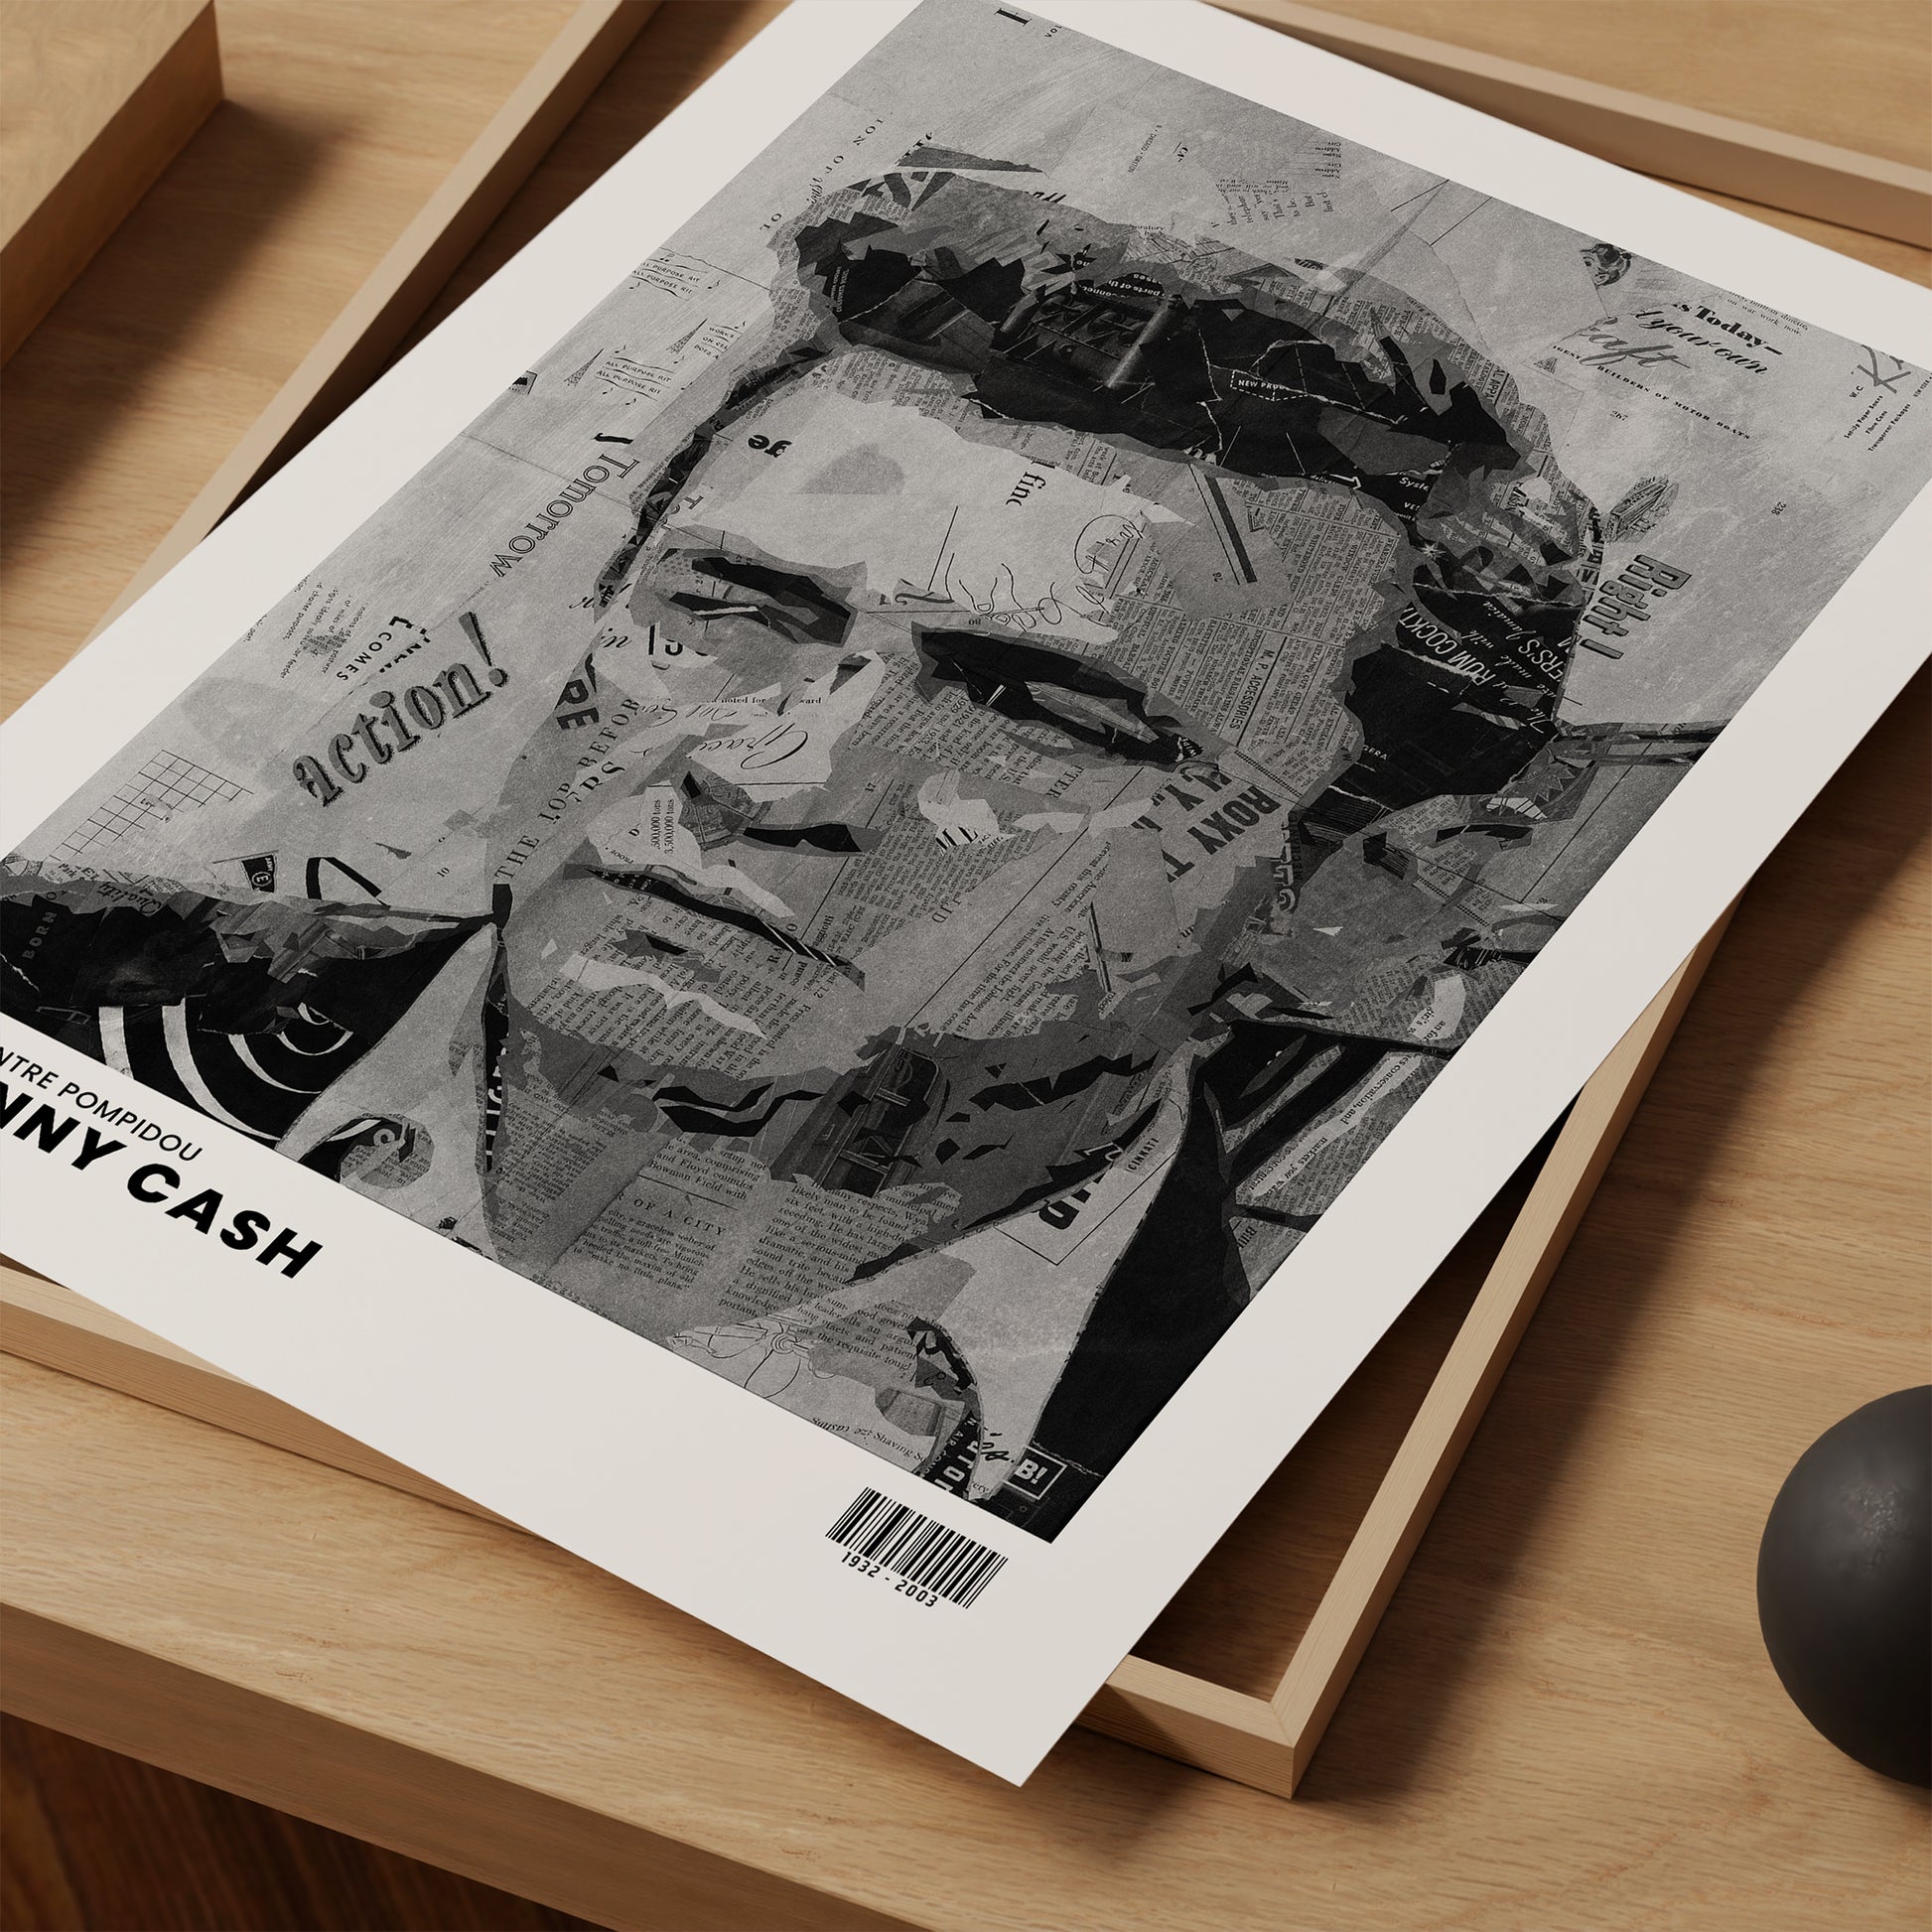 Be inspired by Iconic Johnny Cash Paris Centre Pompidou Exhibition Art Print. The artwork is presented as a print close up that captures its timeless beauty in every detail.